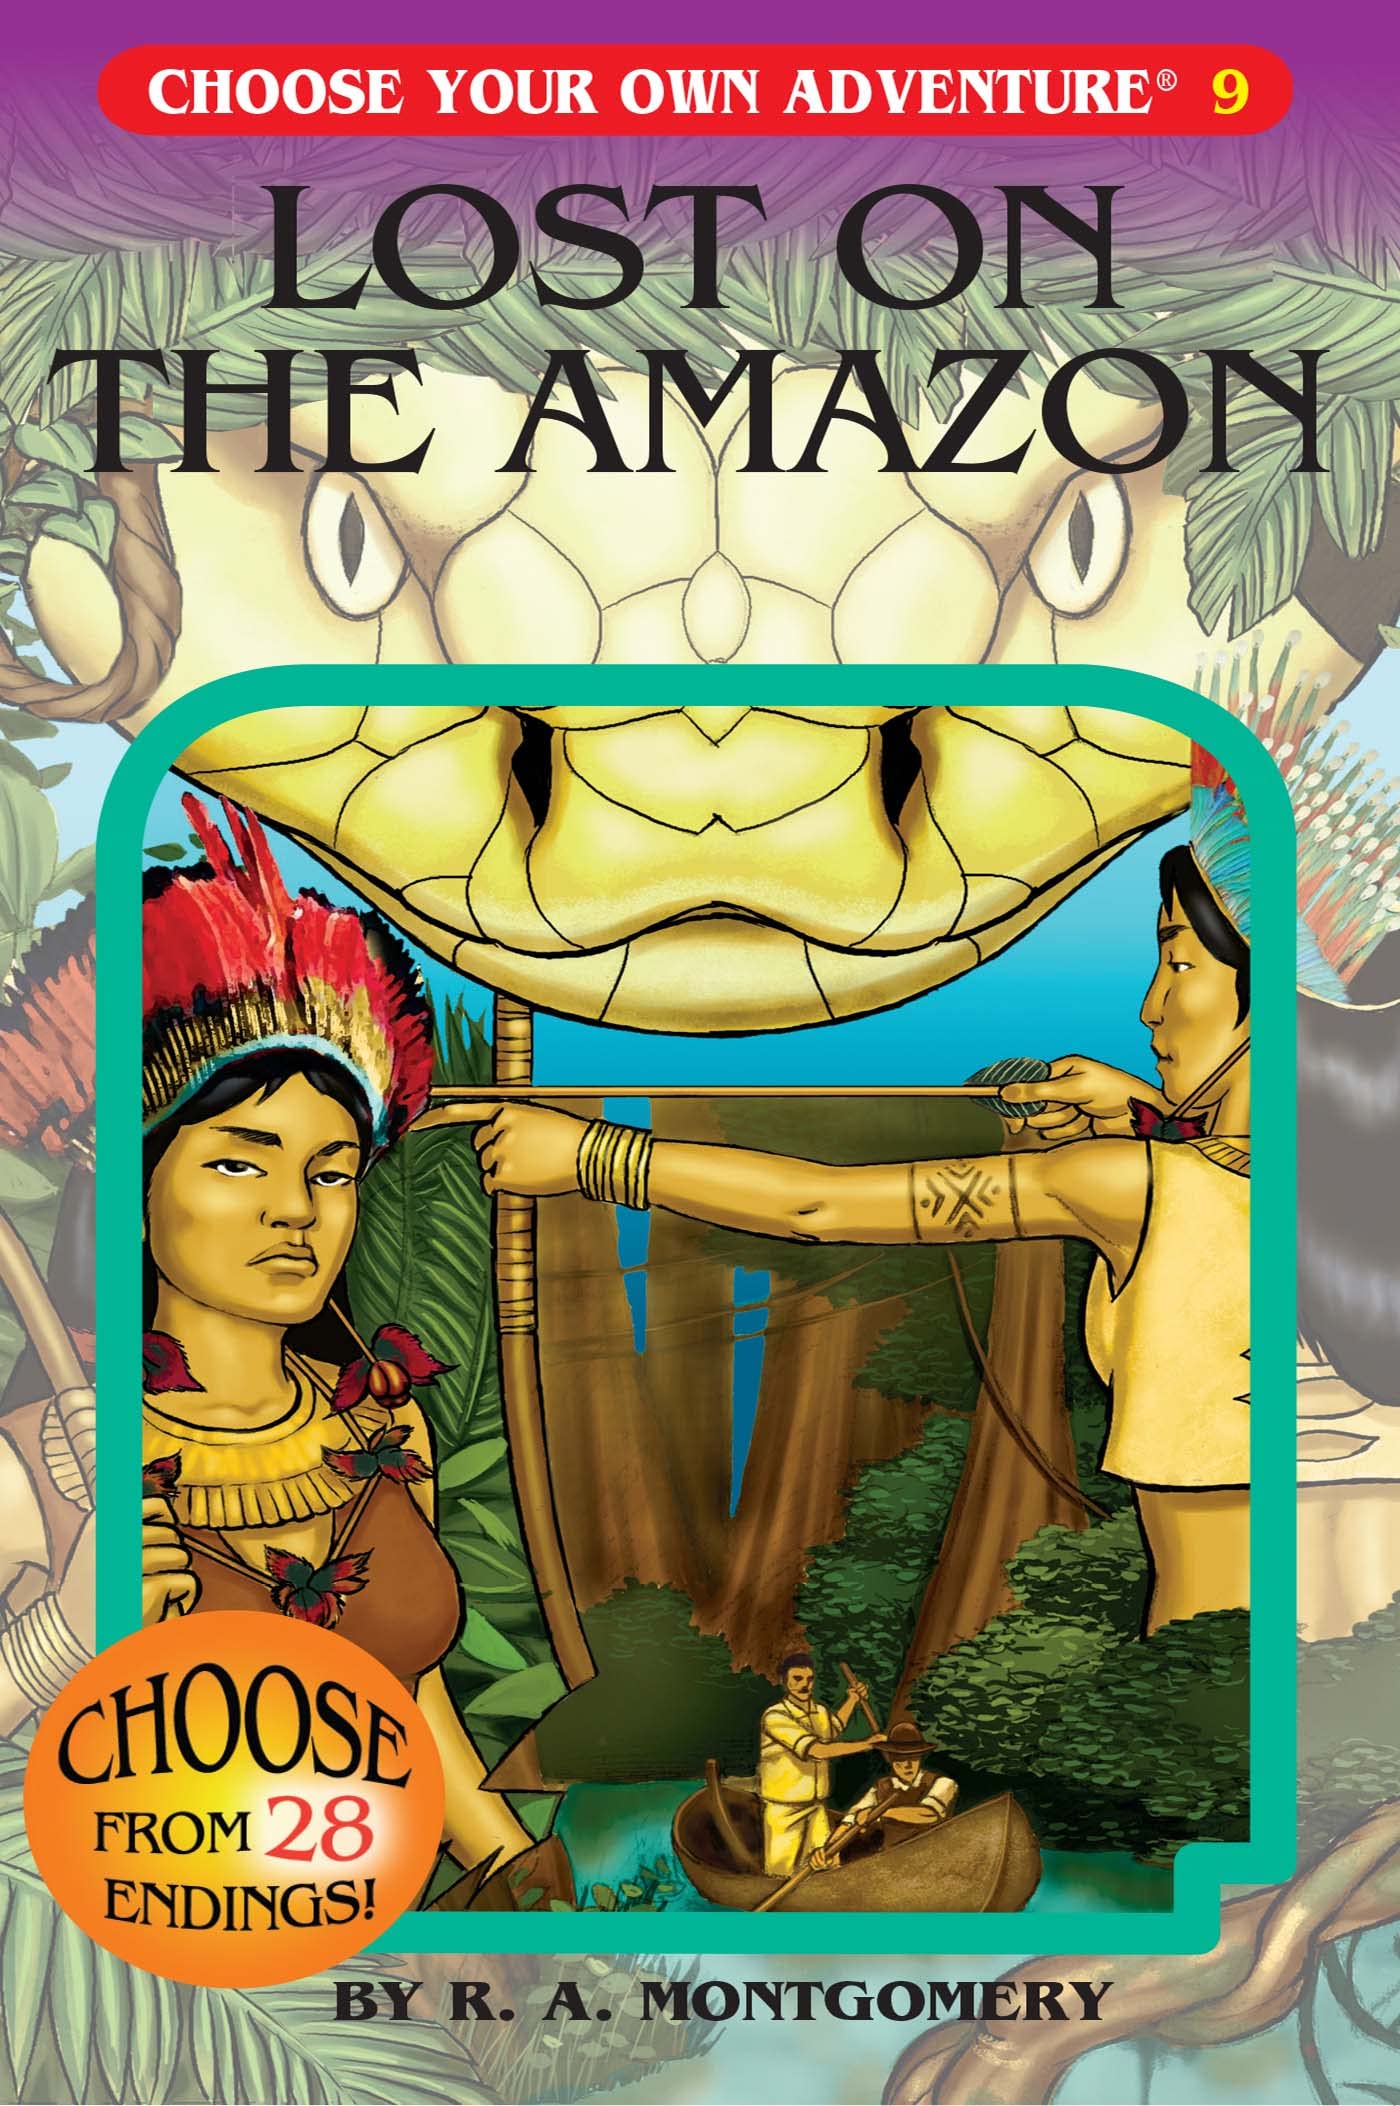 LOST ON THE AMAZON: Choose Your Own Adventure book